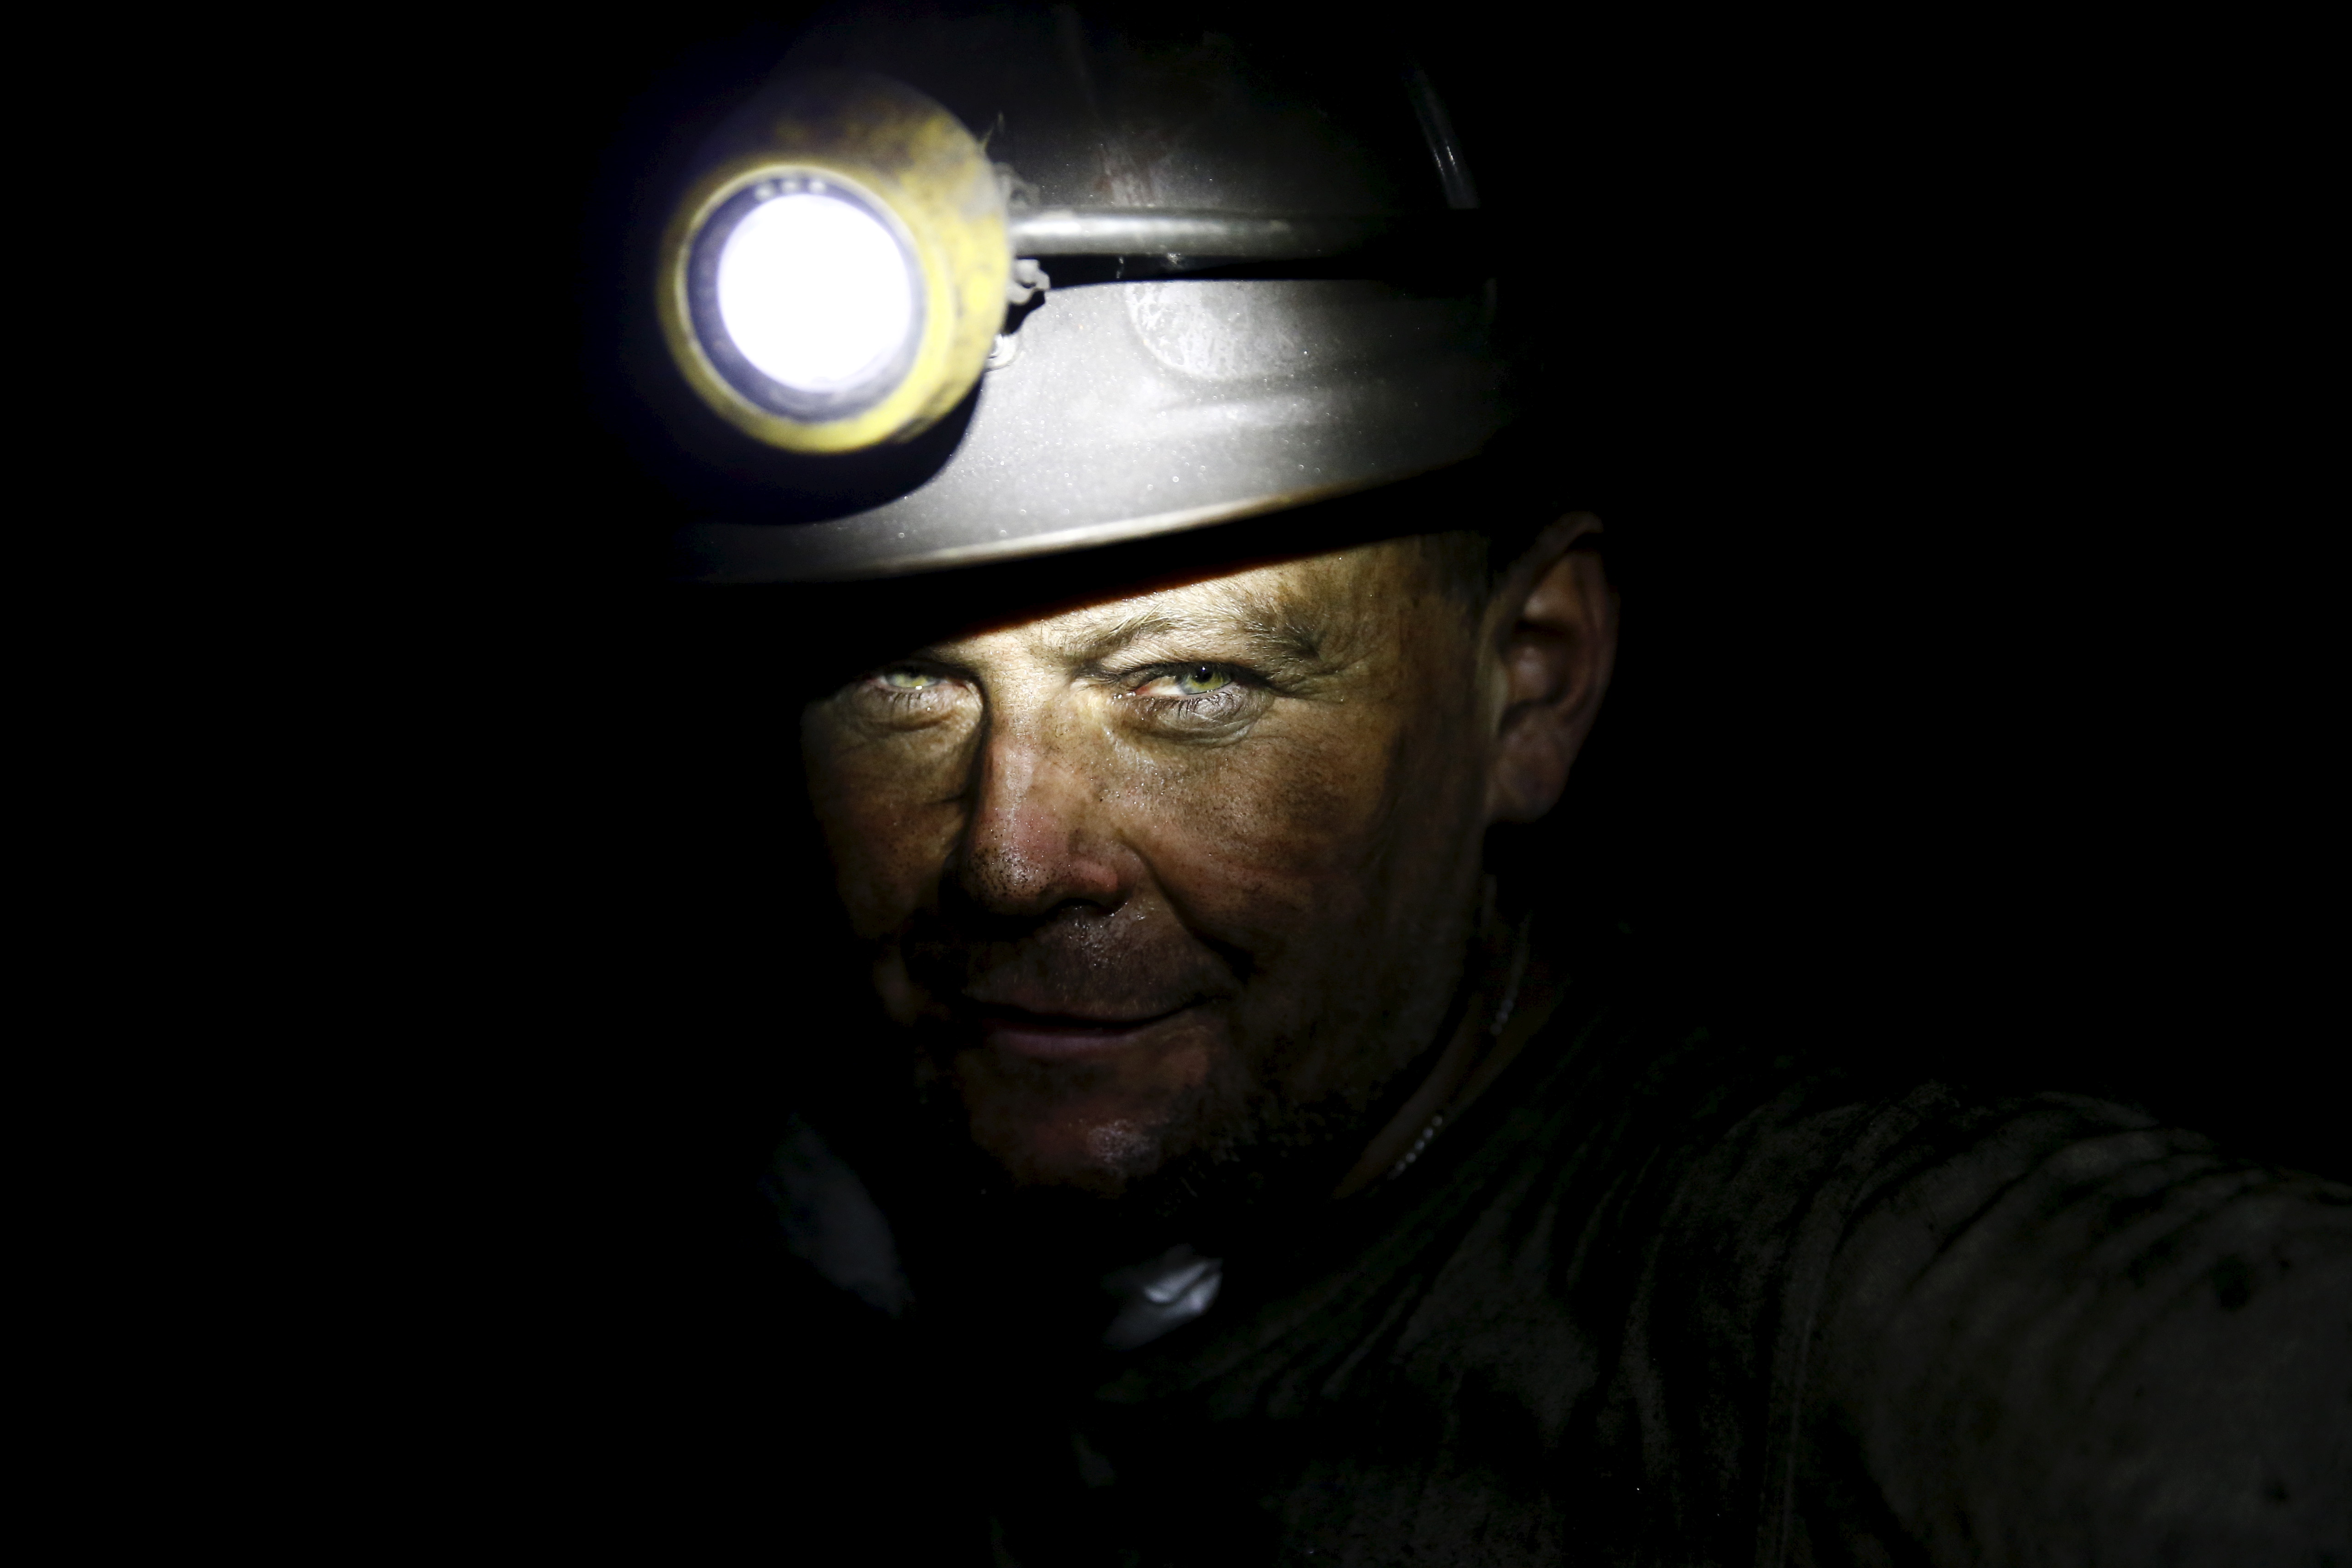 Piotr Dytko, 42, a miner who has has worked for 24 years in mines, looks on as he works about 500 meters underground at the Boleslaw Smialy coal mine, a unit of coal miner Kompania Weglowa (KW) in Laziska Gorne